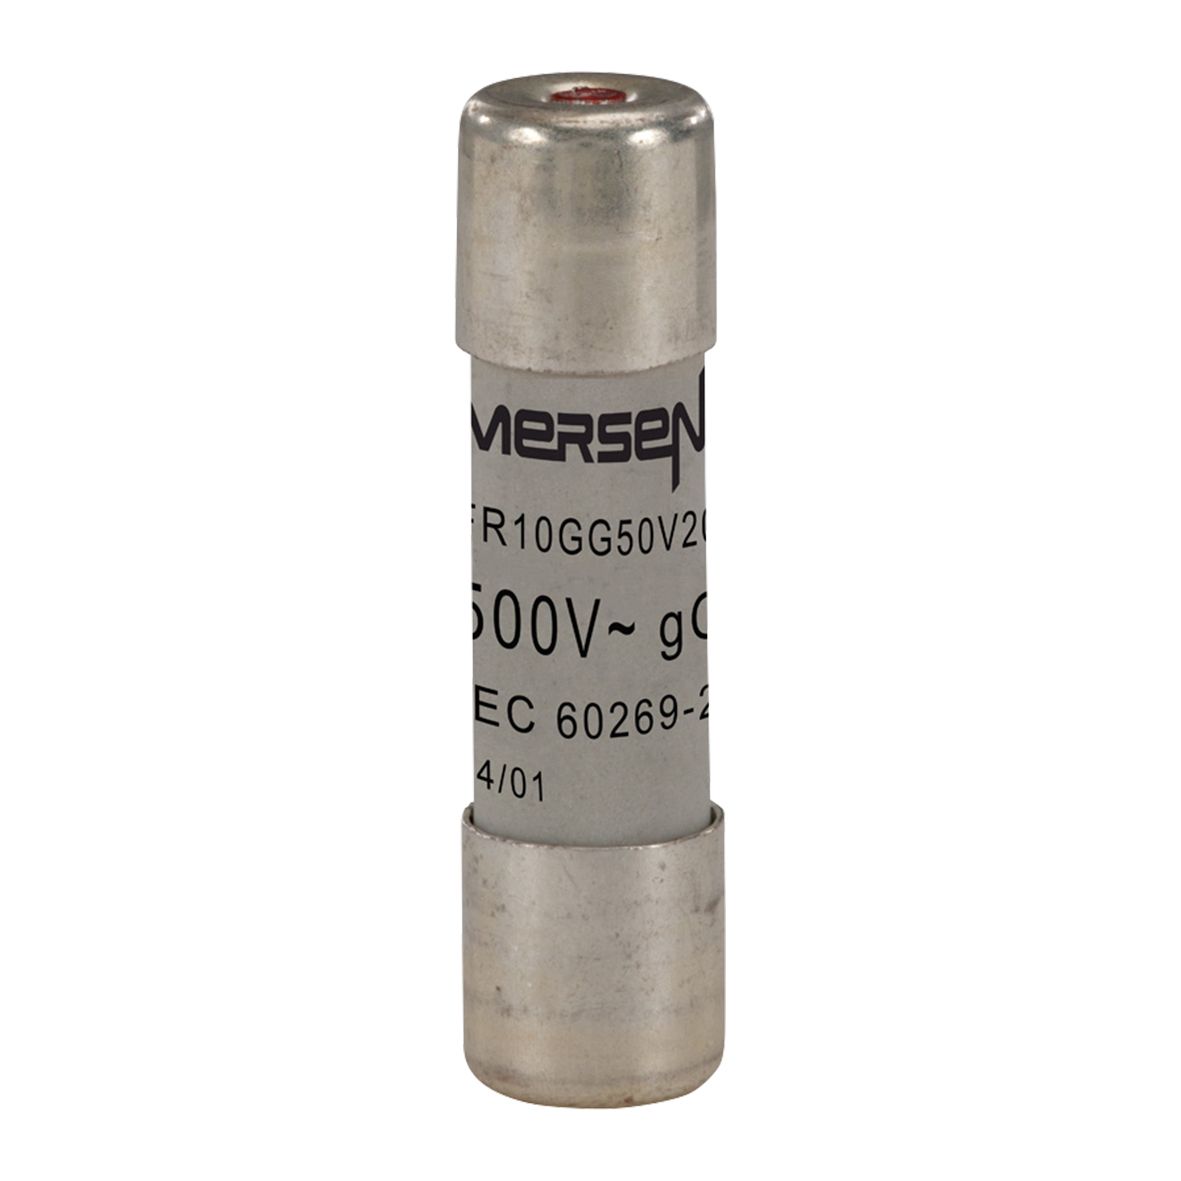 X211551 - Cylindrical fuse-link gG 500VAC 10.3x38, 20A with indicator